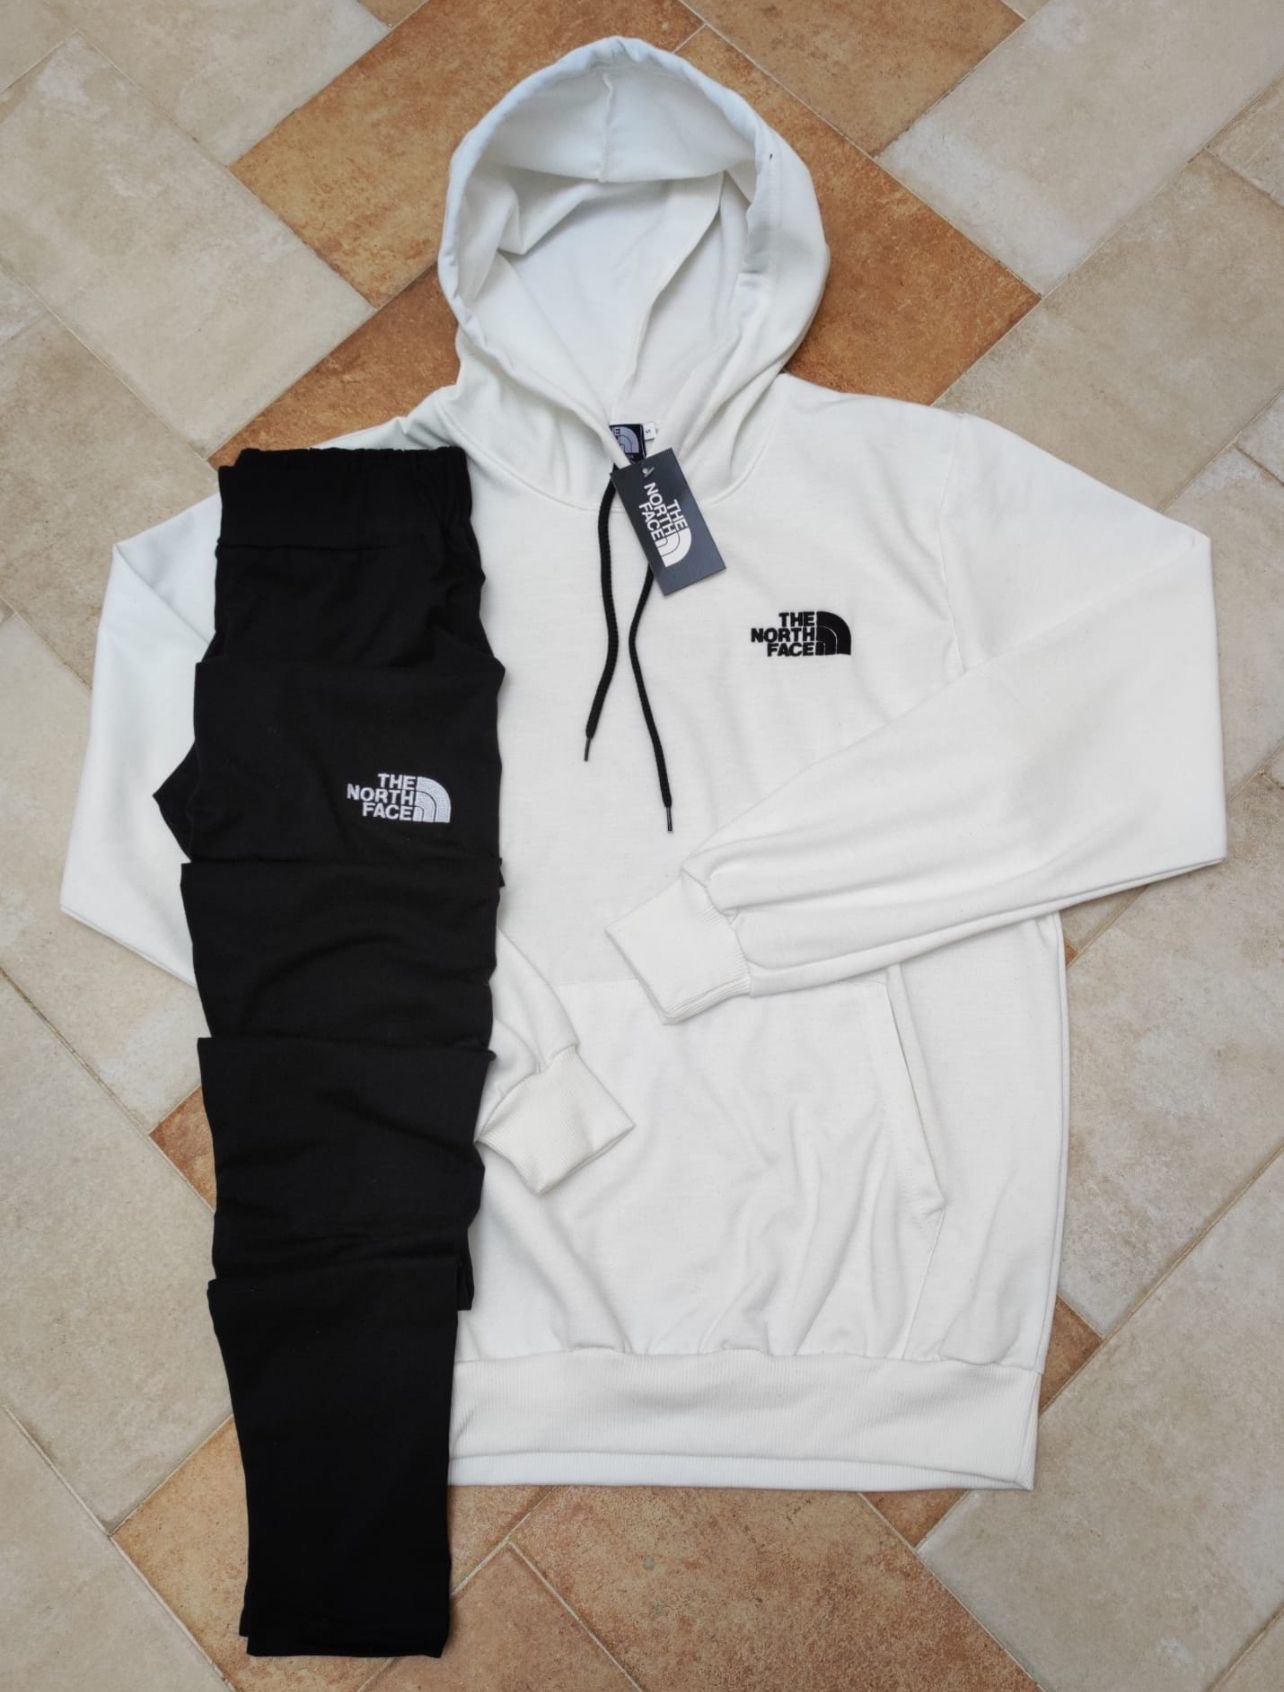 The Northface Tracksuit